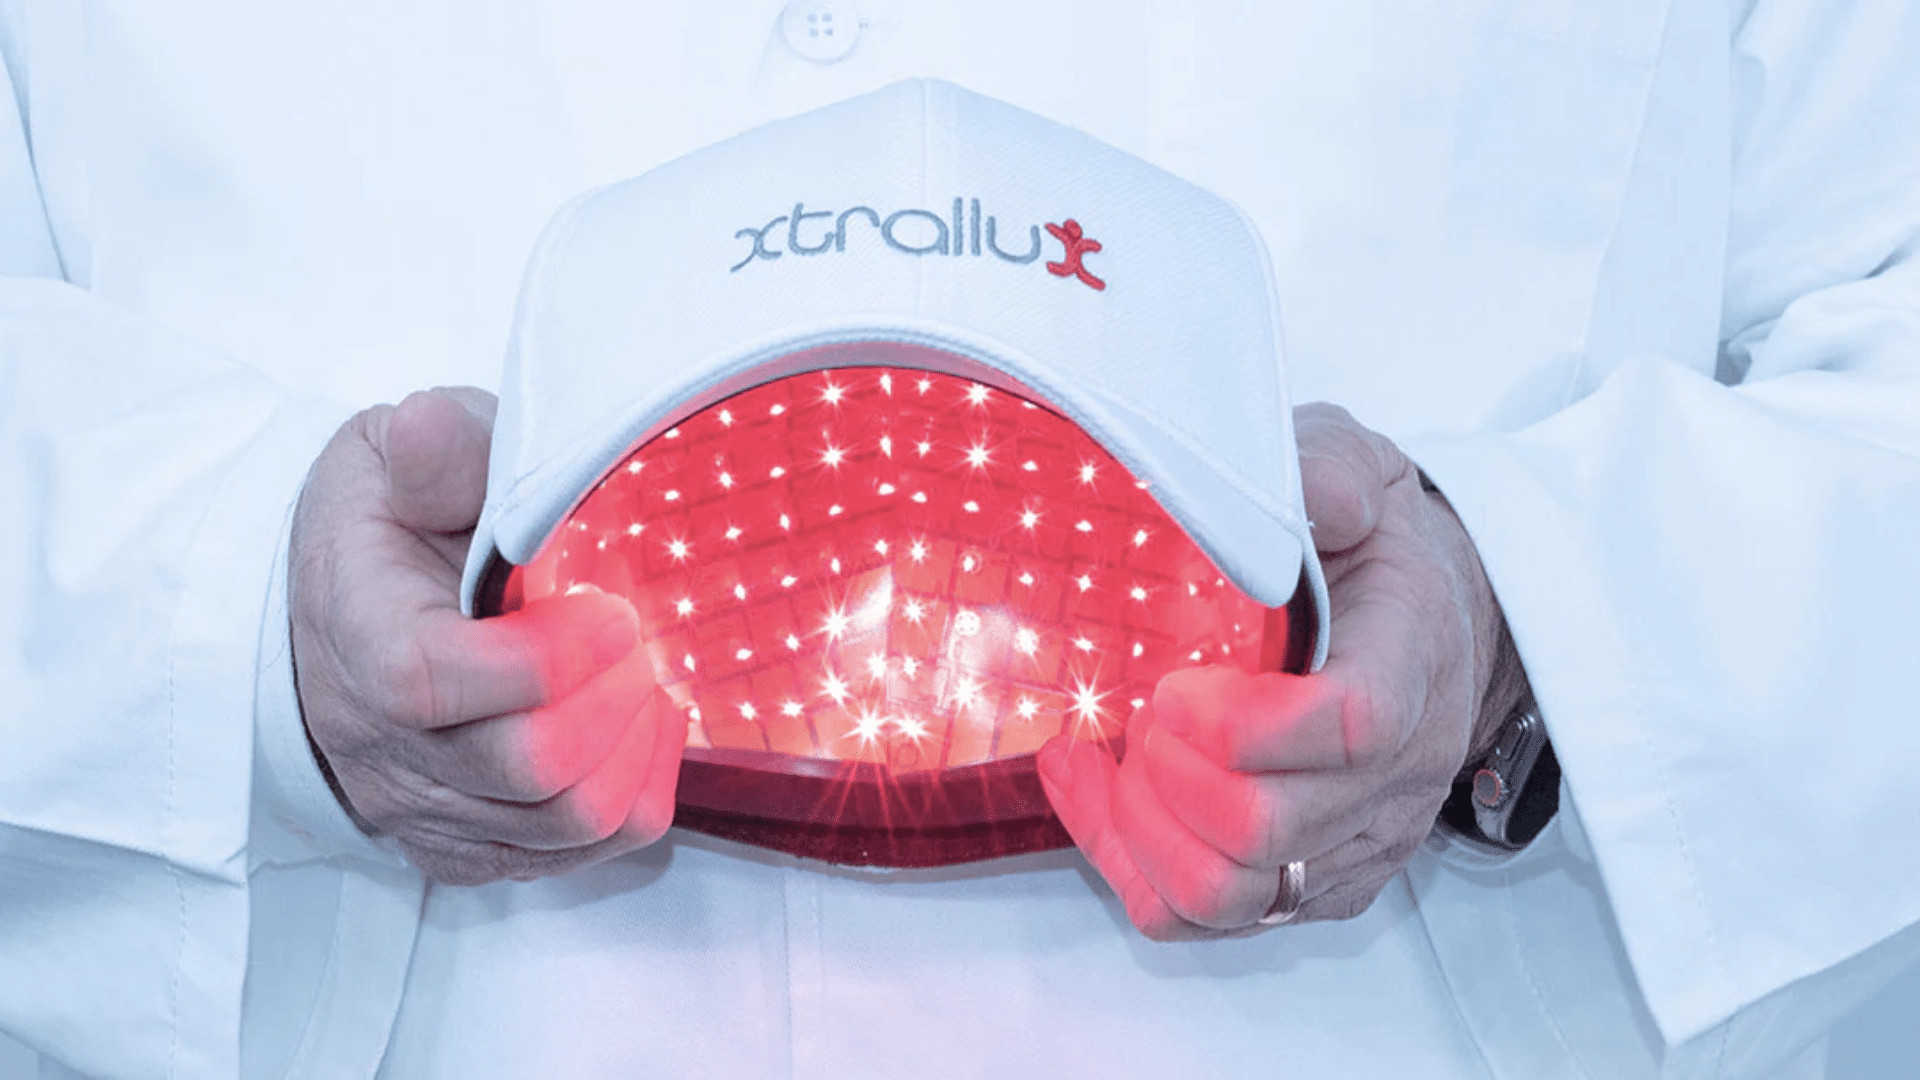 Xtrallux hair regrowth cap can  promote hair growth after your hair transplant procedure